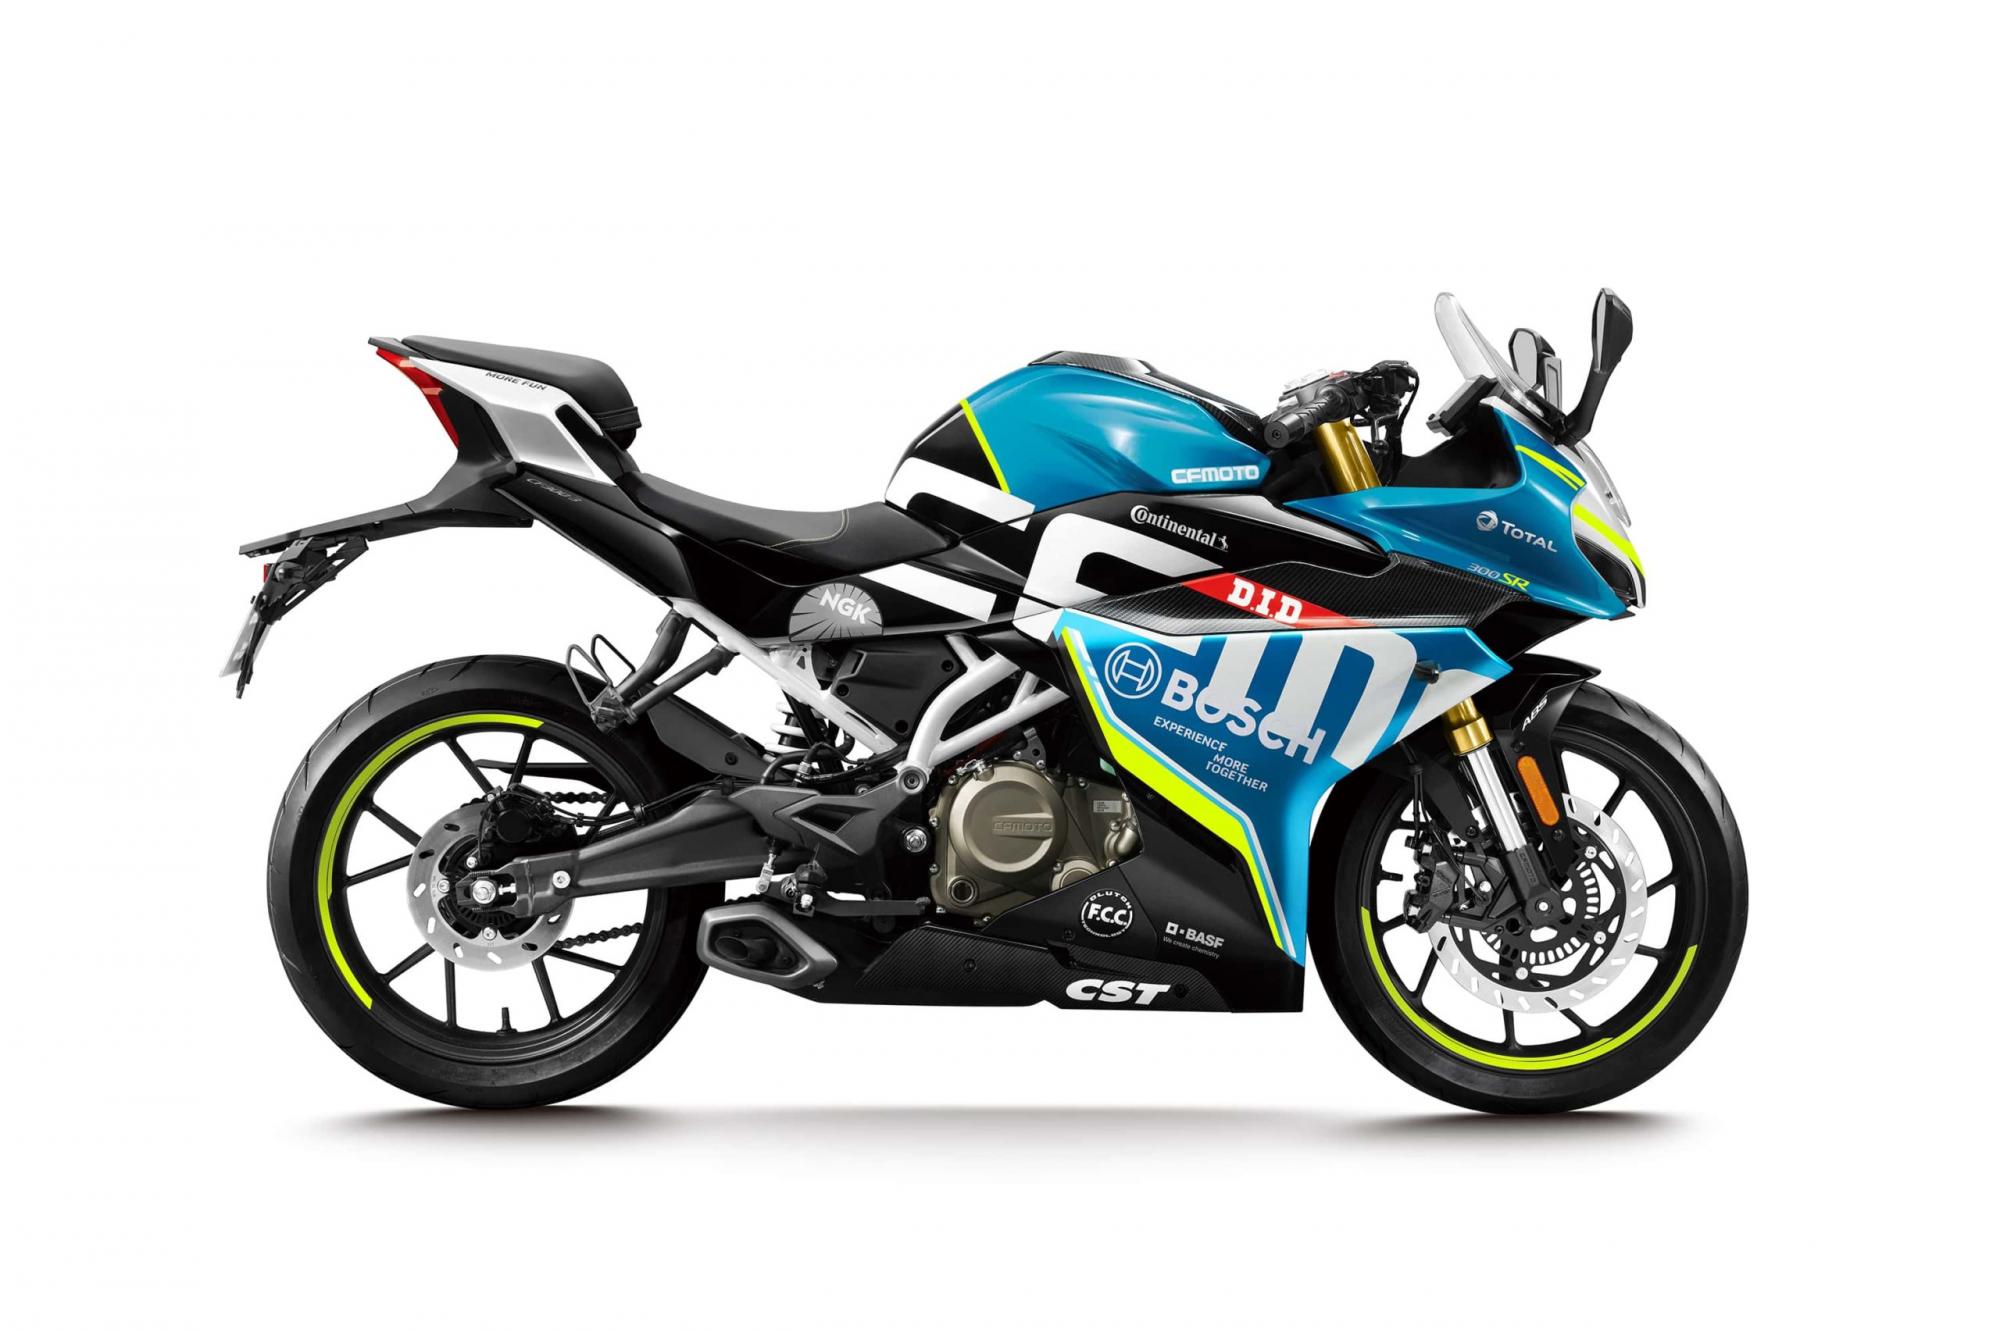 India-bound CFMoto 300SR launched in the Philippines at INR 2.54 lakh